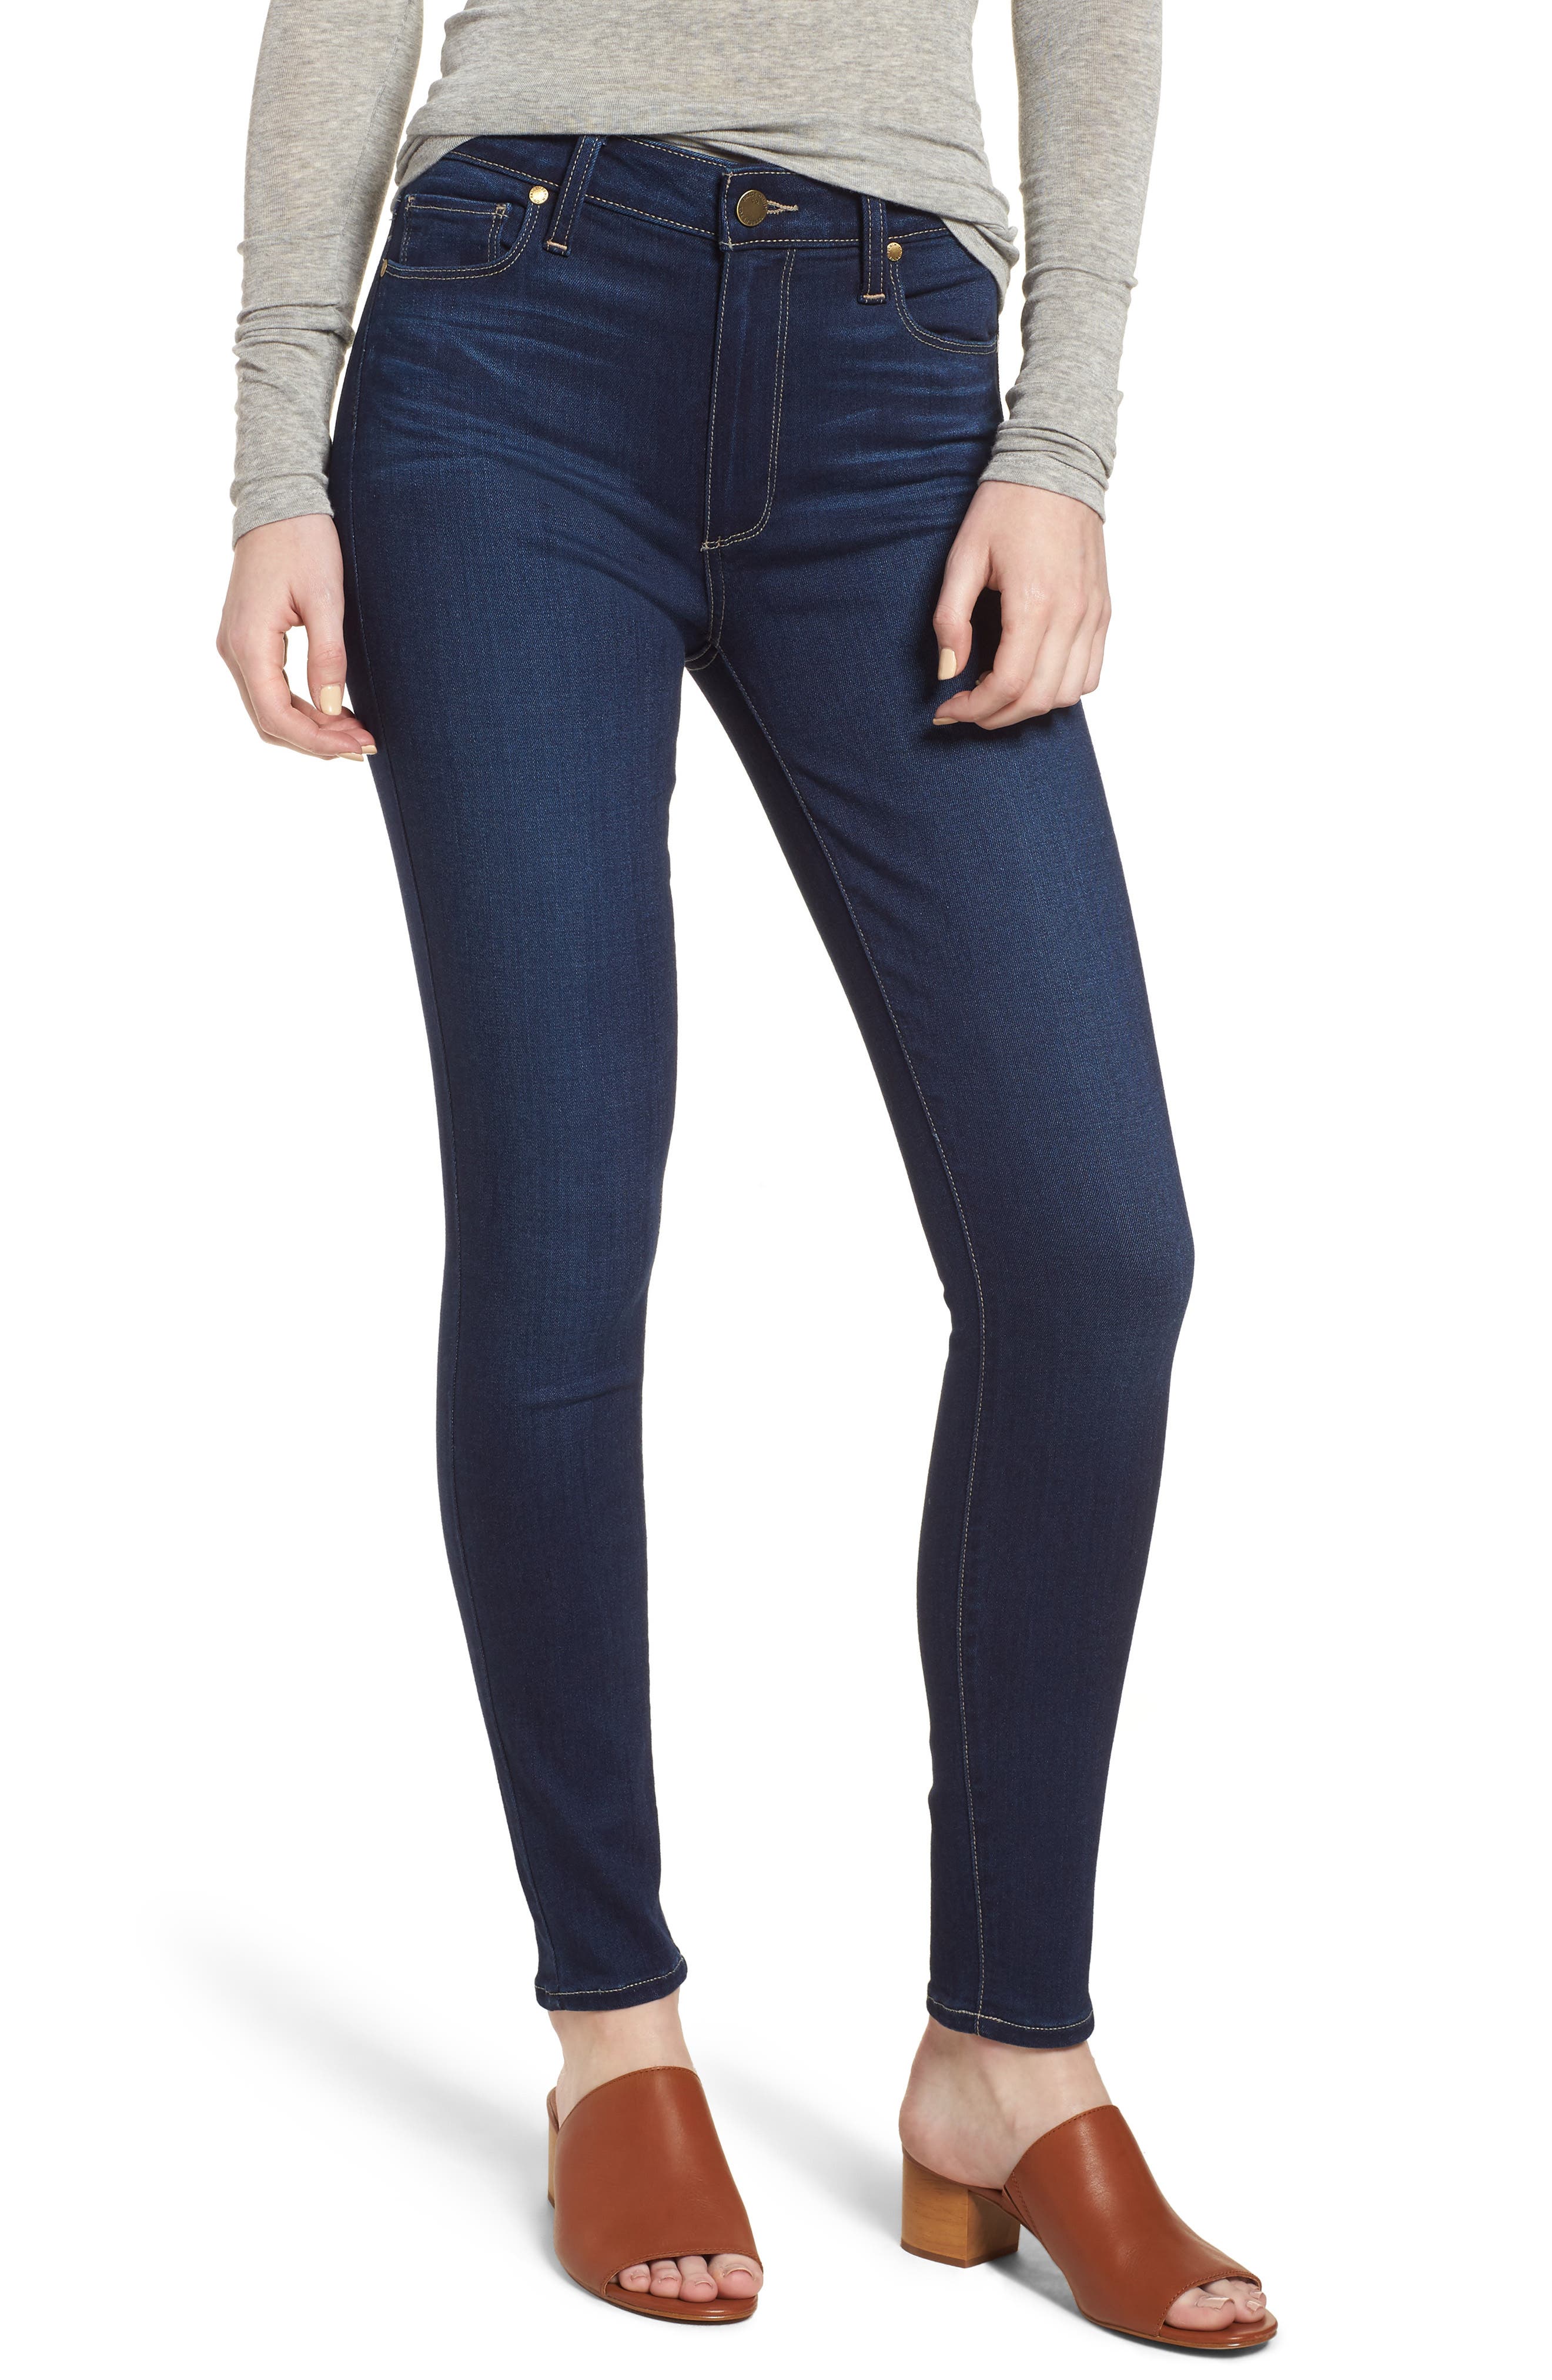 paige hoxton high rise ankle jeans